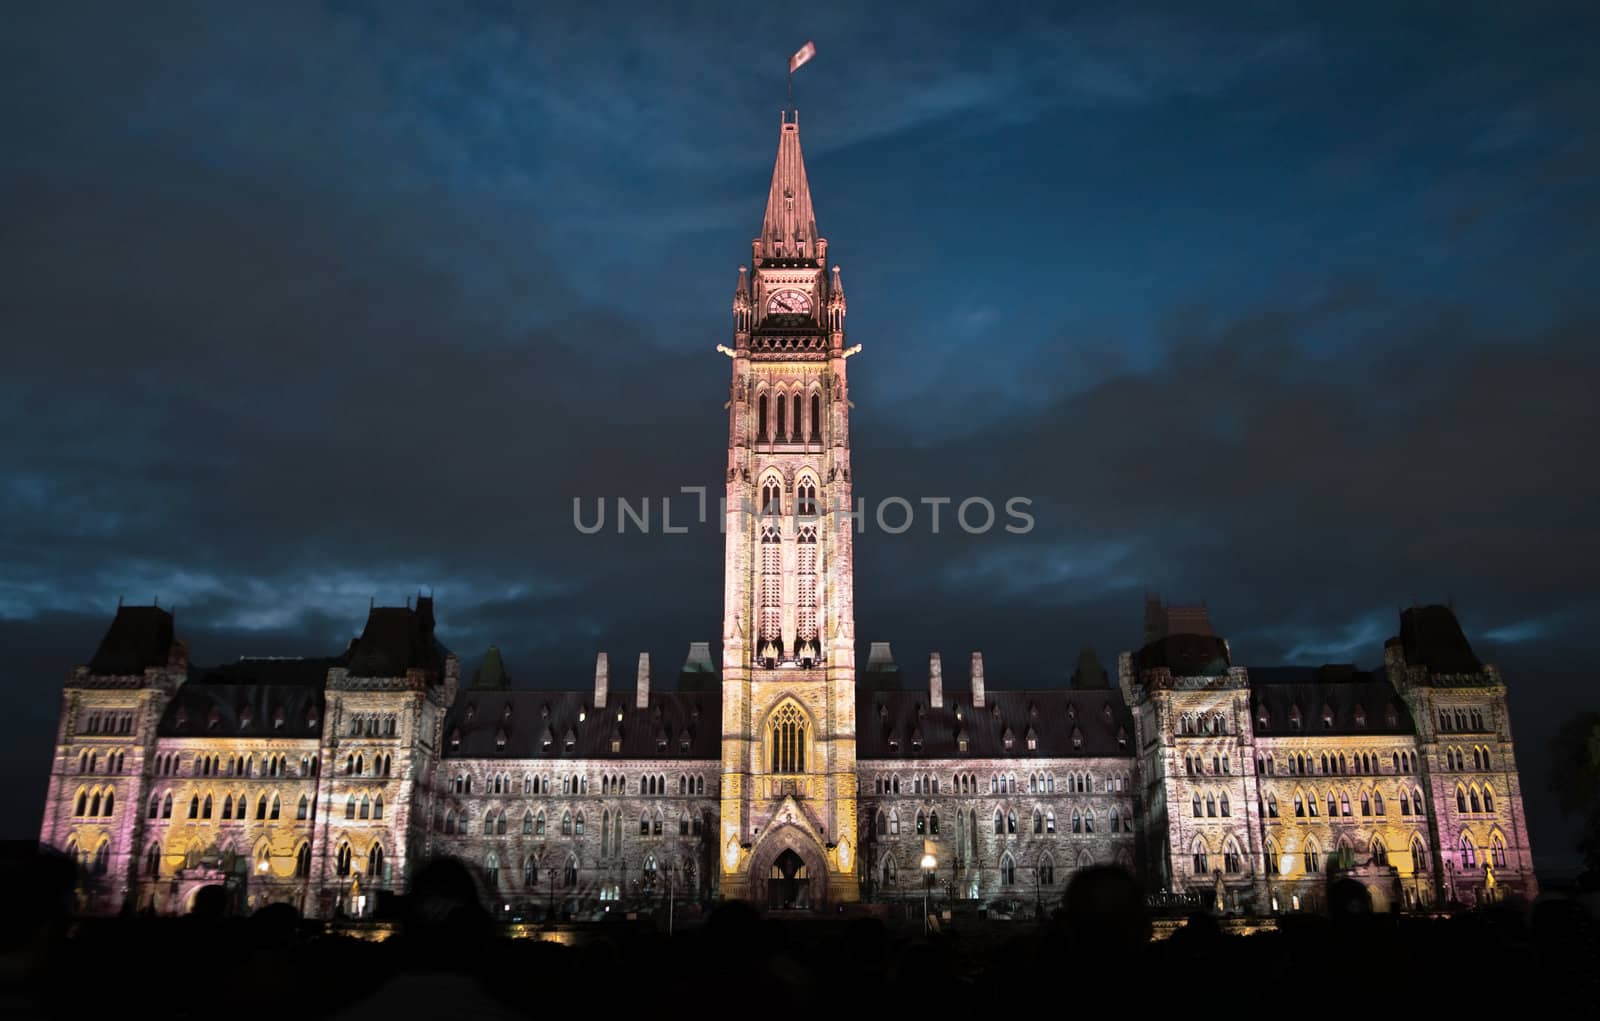 The canadian Parliament during the sound and light show in Ottawa, Canada.